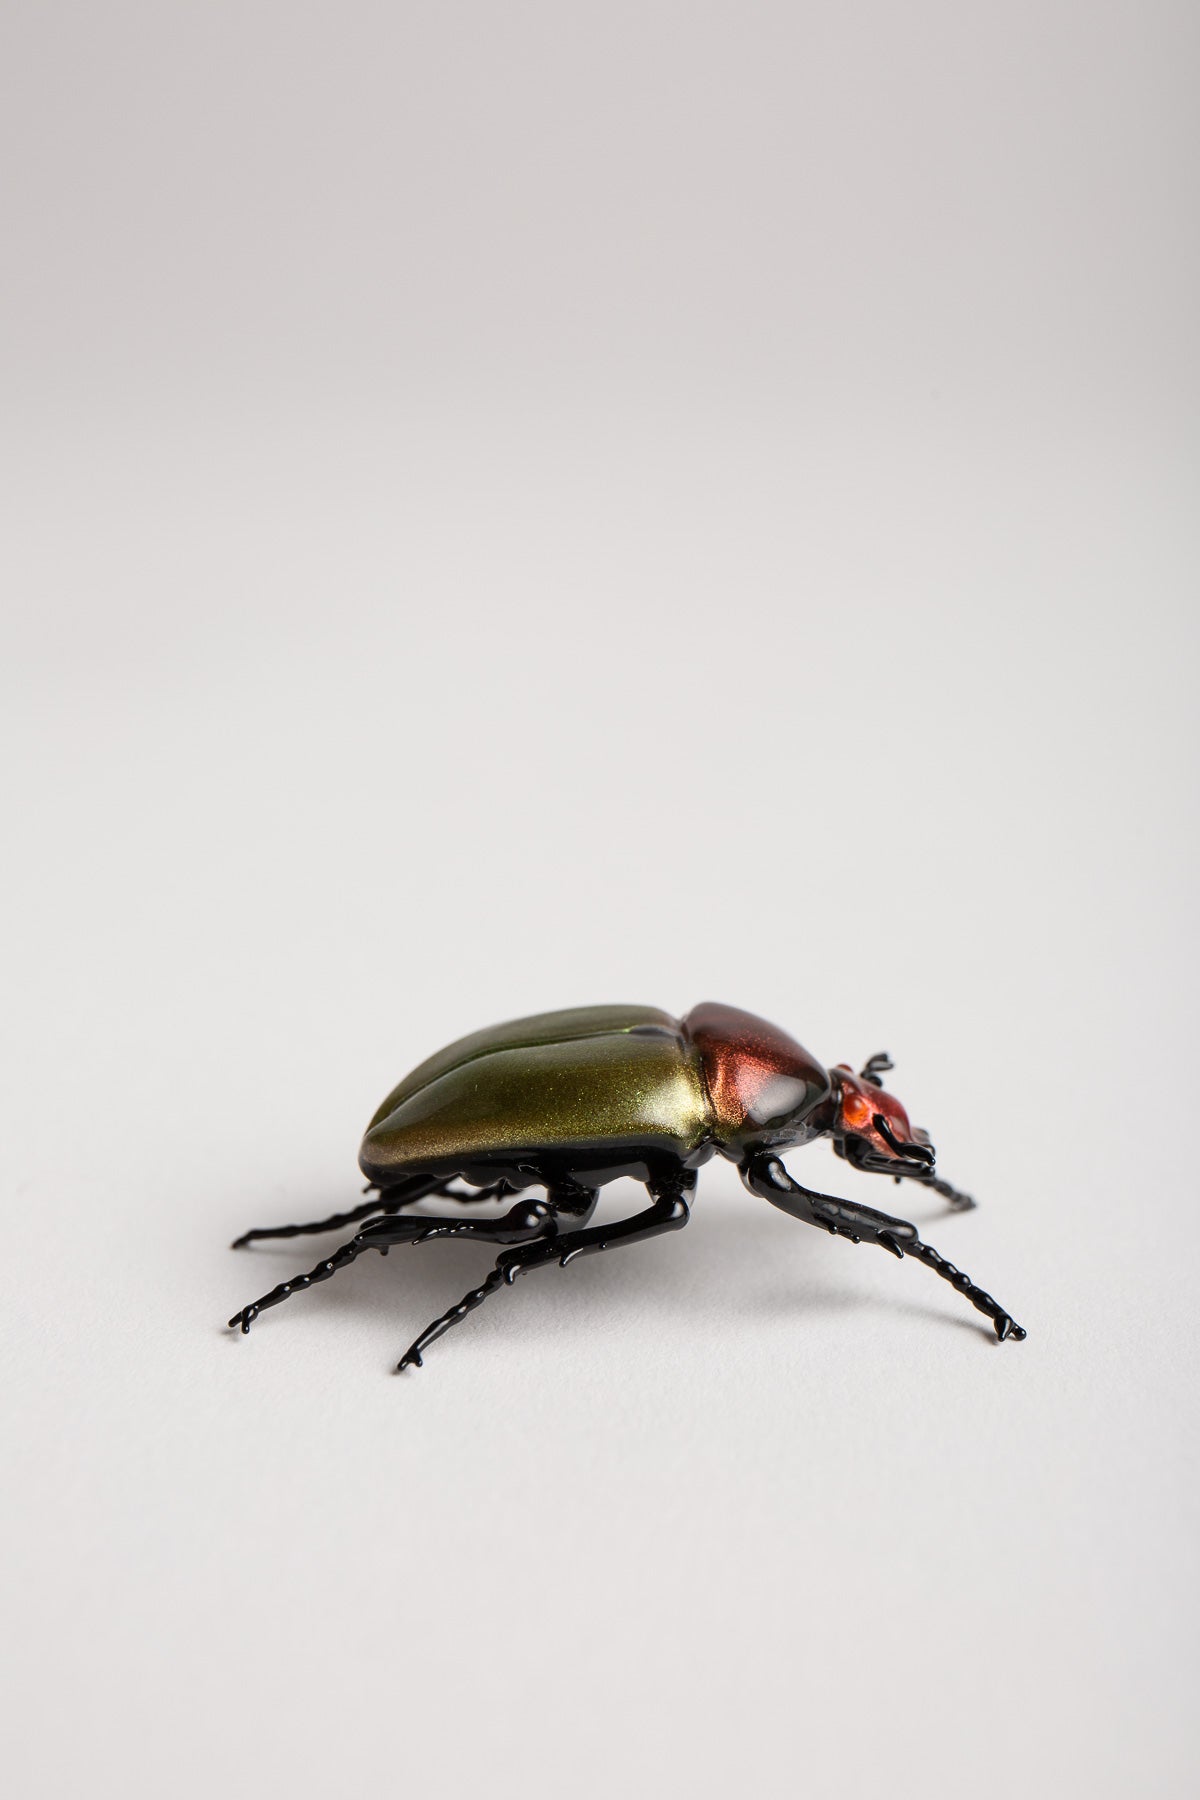 MAXFIELD PRIVATE COLLECTION | GREEN JUNE BEETLE